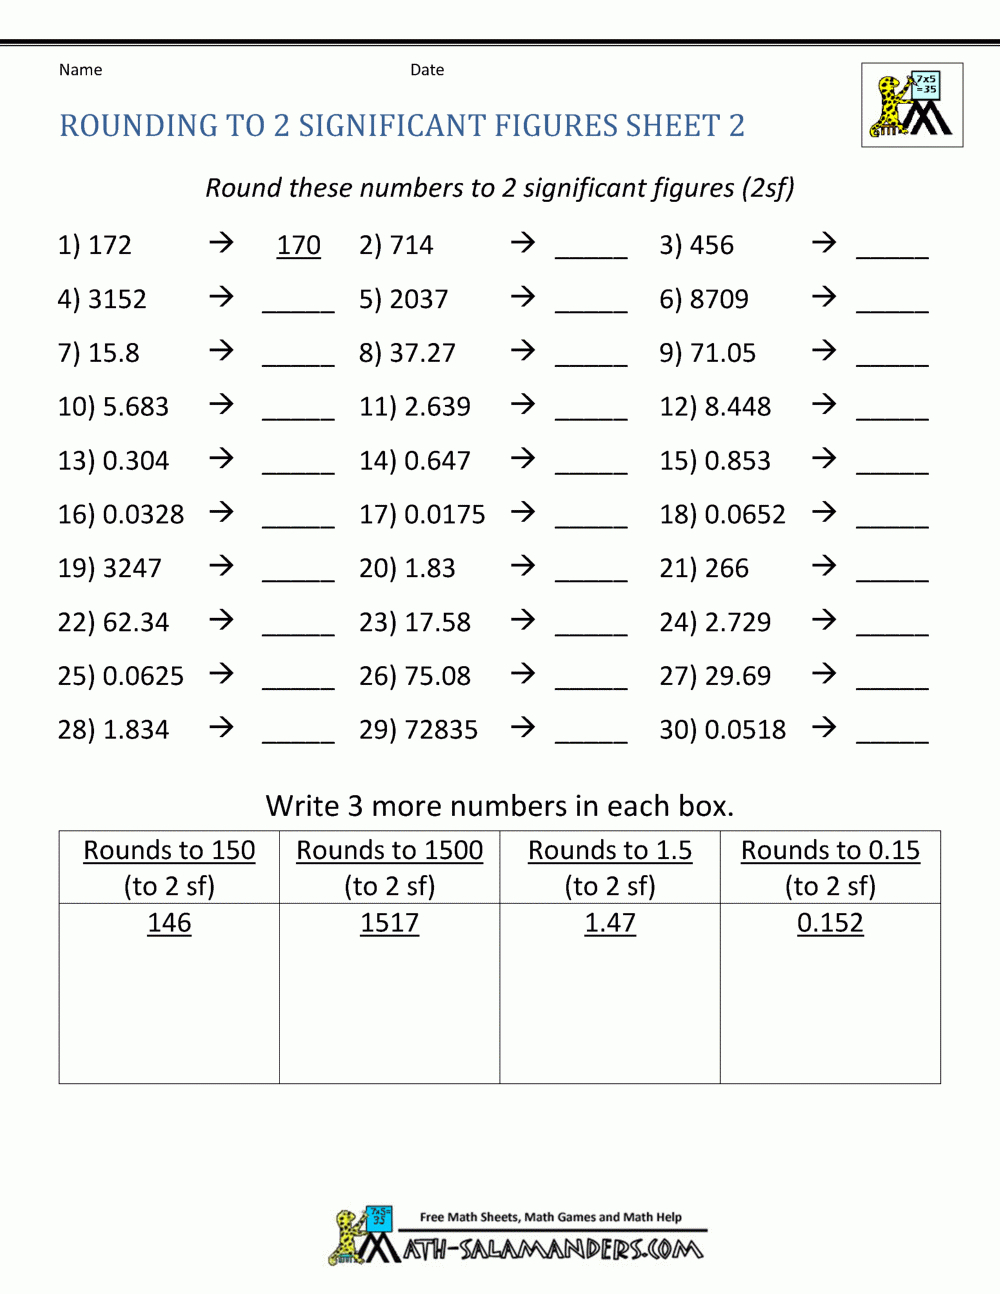 Rounding Significant Figures db excel com